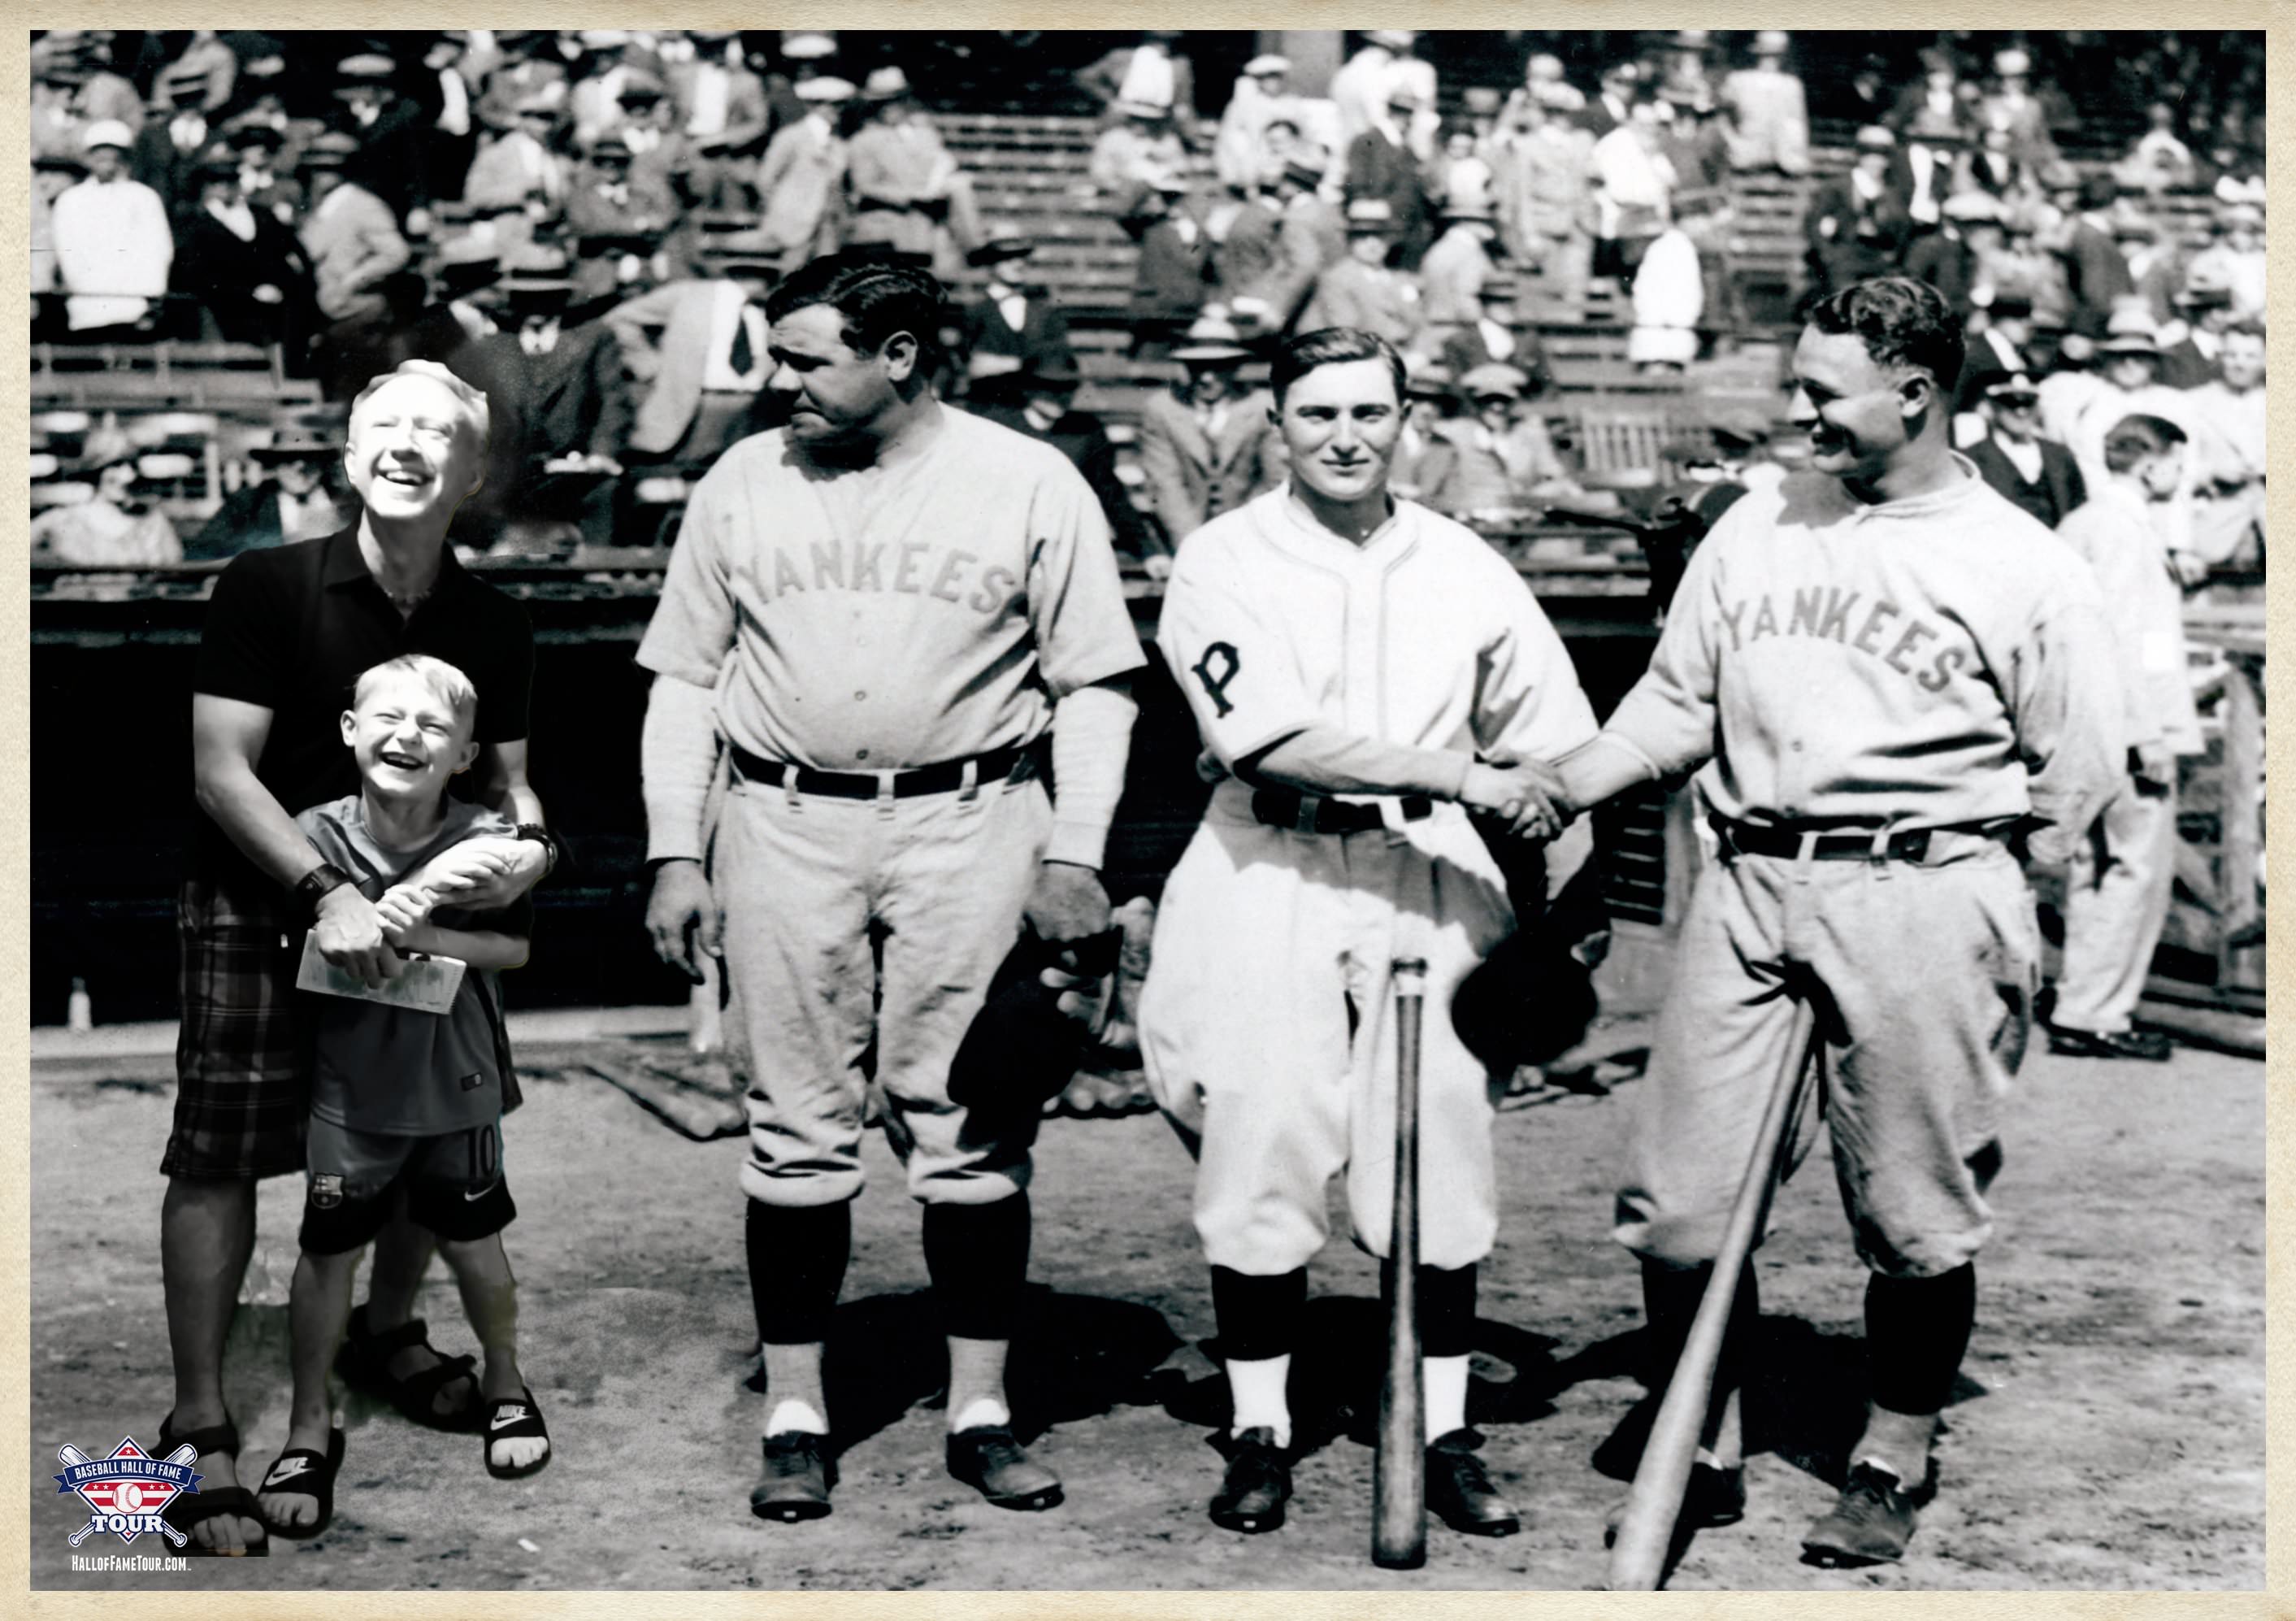 Sean Leary and his son, Jackson, meet Babe Ruth and other sluggers in an interactive photo exhibit at the Baseball Hall of Fame show in Davenport.